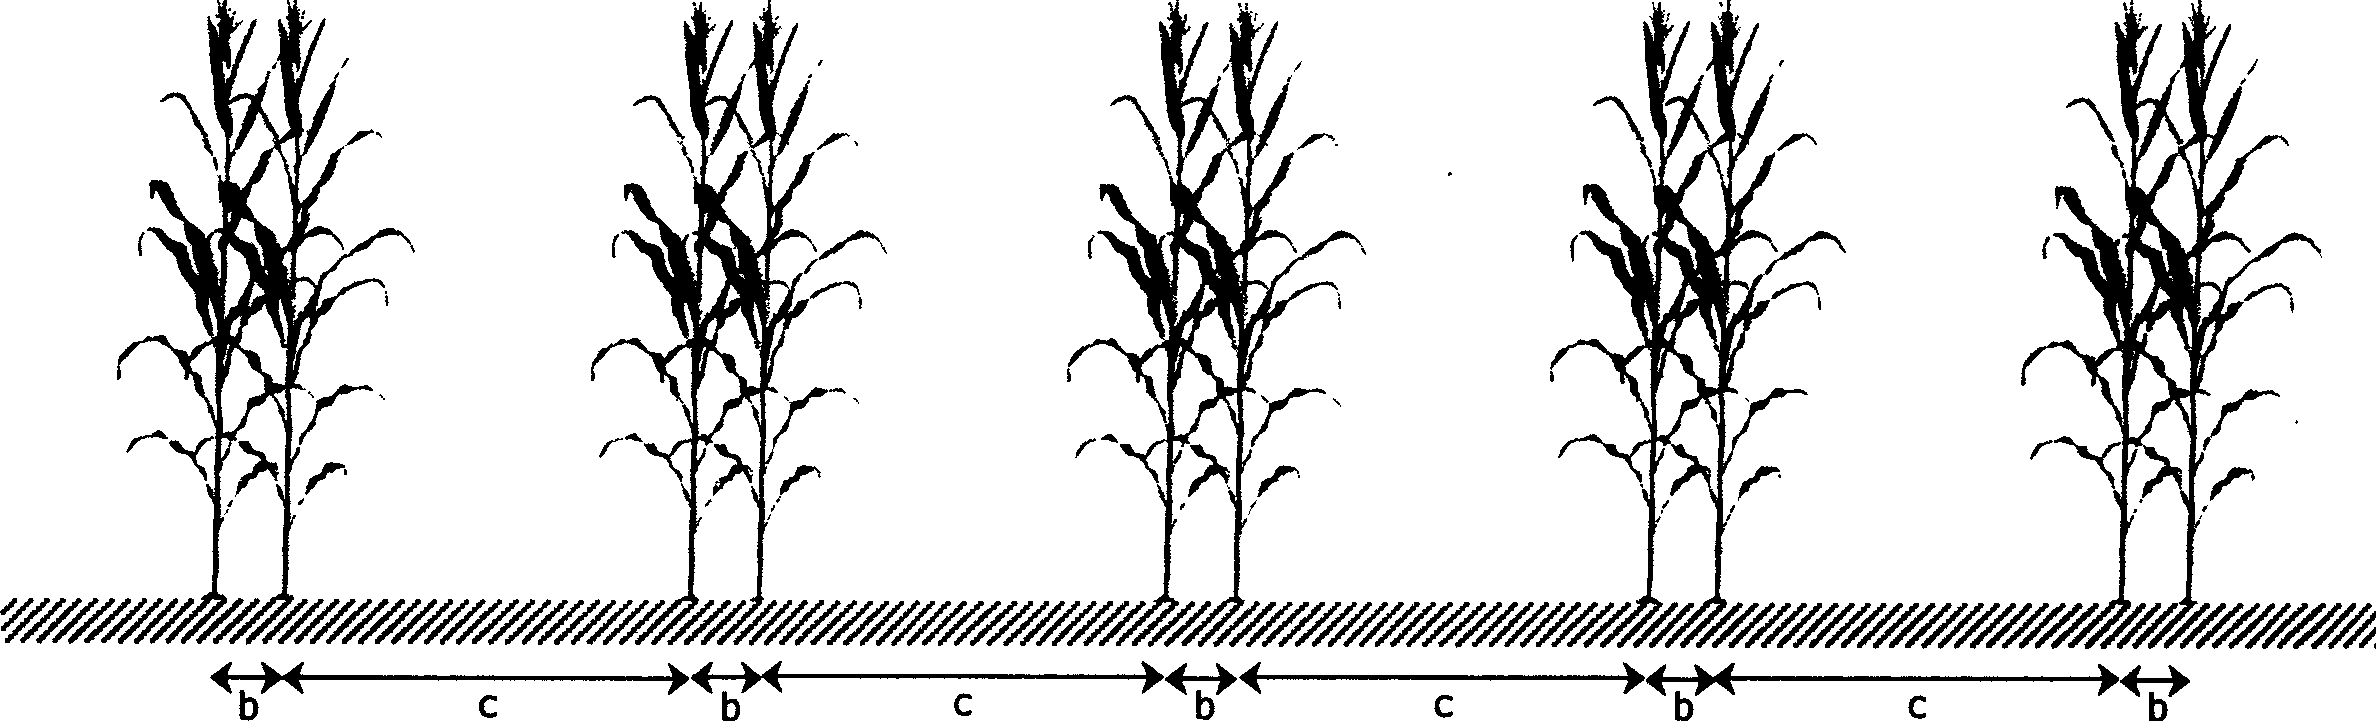 Ridge direction changing and ridge distance enlarging method for cultivating corn